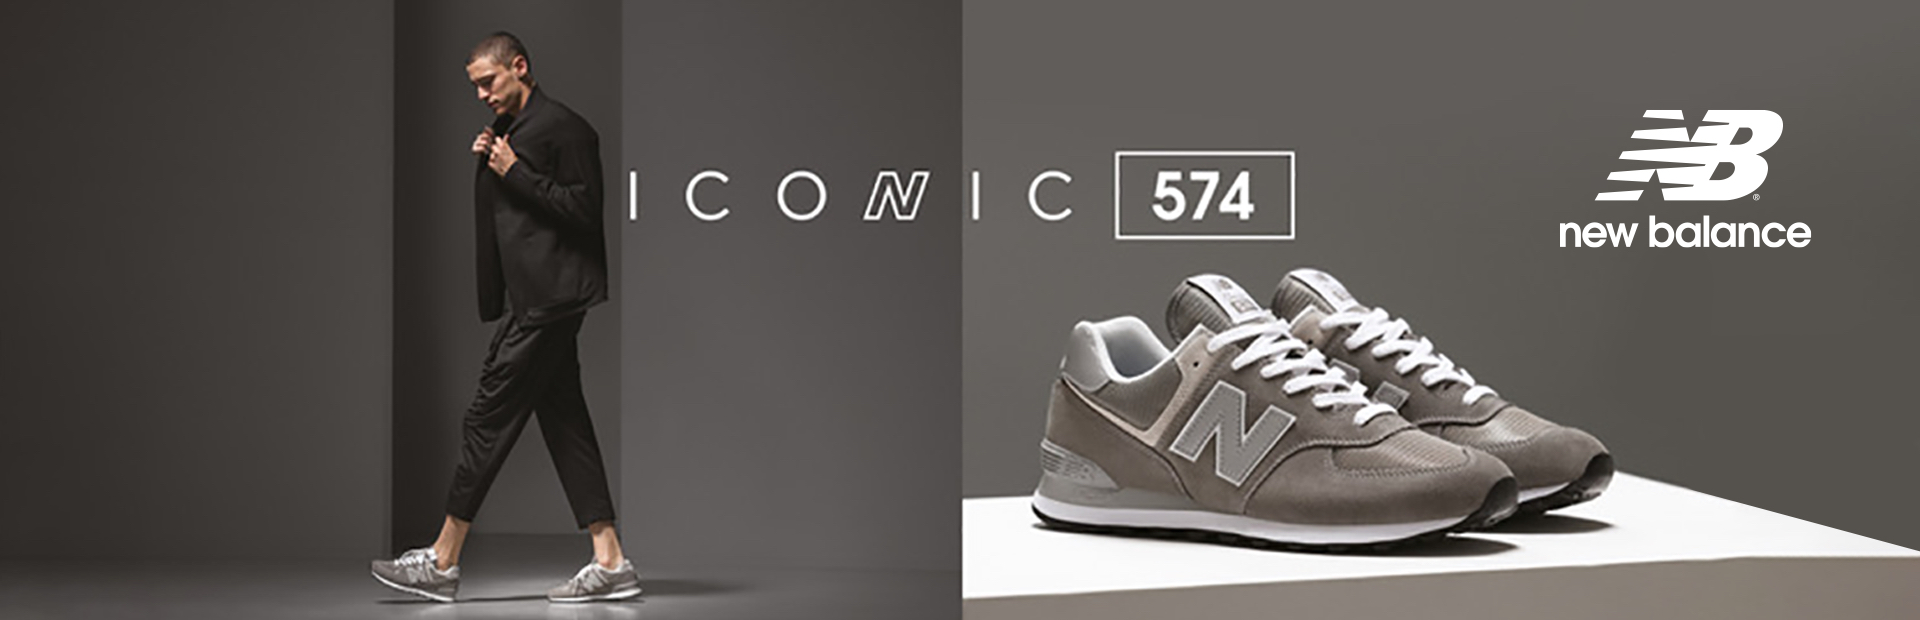 NEW BALANCE - The best brands only on - Torino Outlet Village